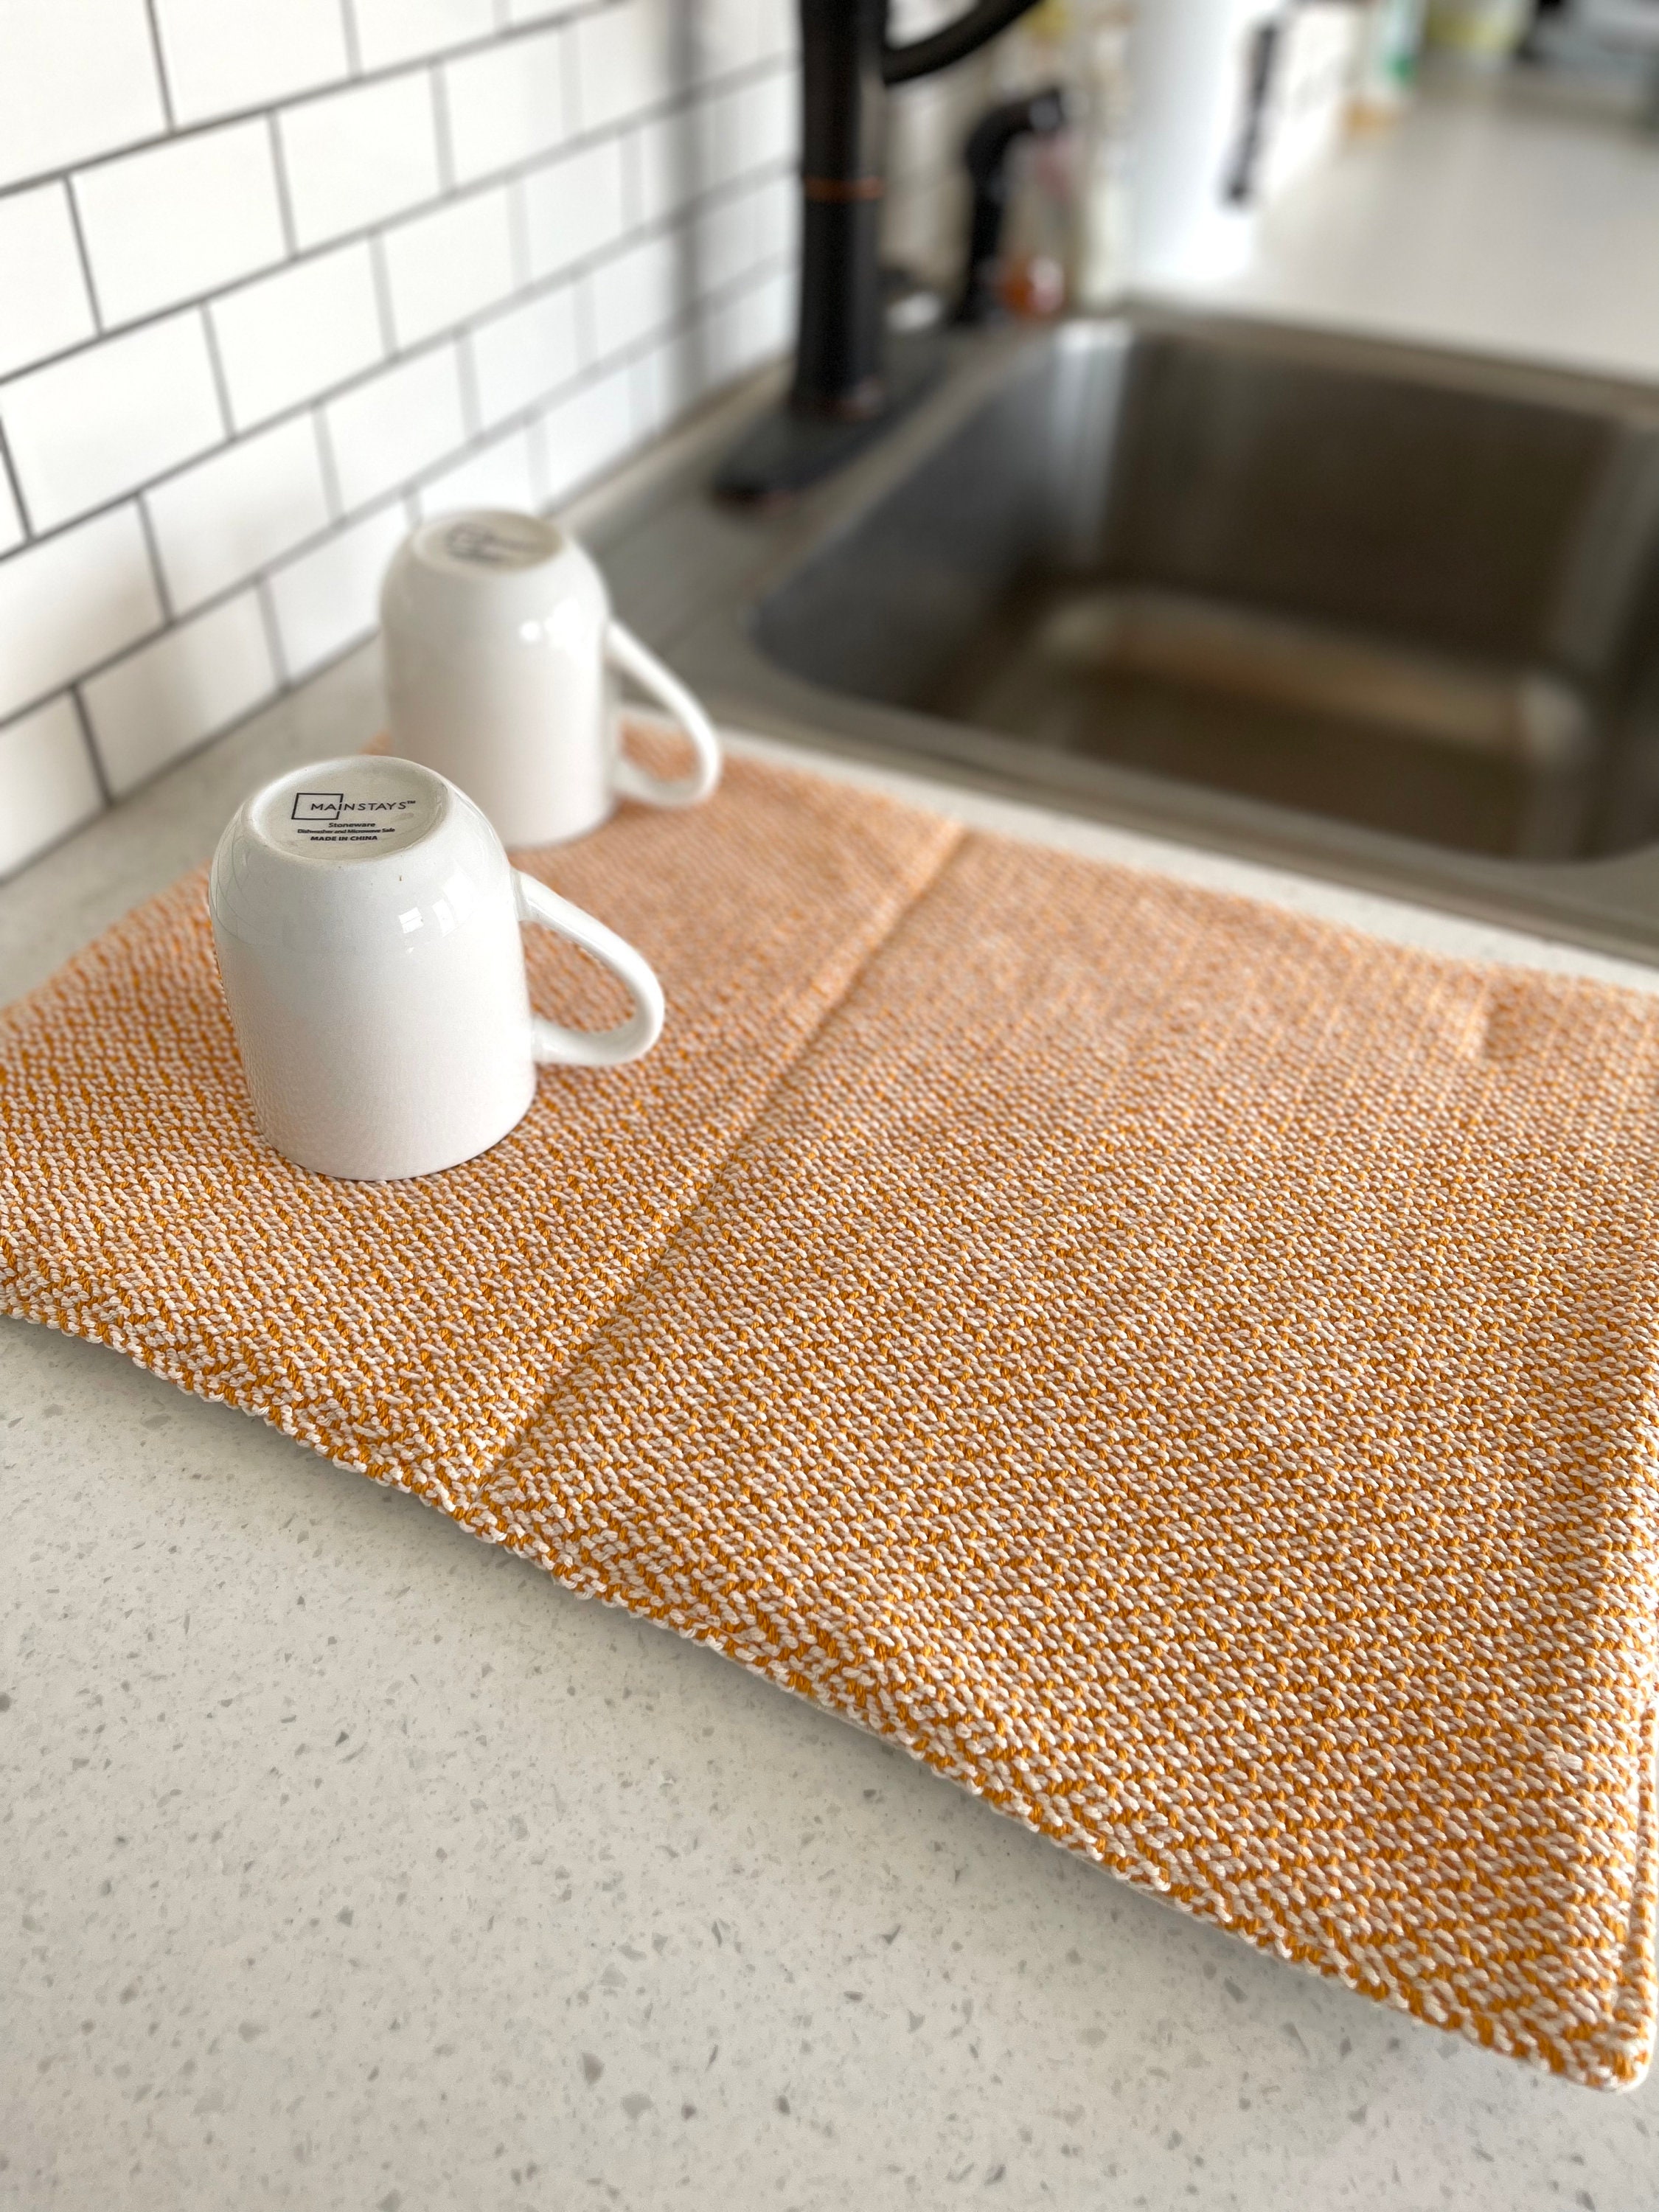 Quick Drying Stone Mat for Kitchen Counter, Made of Diatomaceous Earth,  Place Draining Rack, Dishes, Etc. on Top, and Dries Instantly, Home Dish